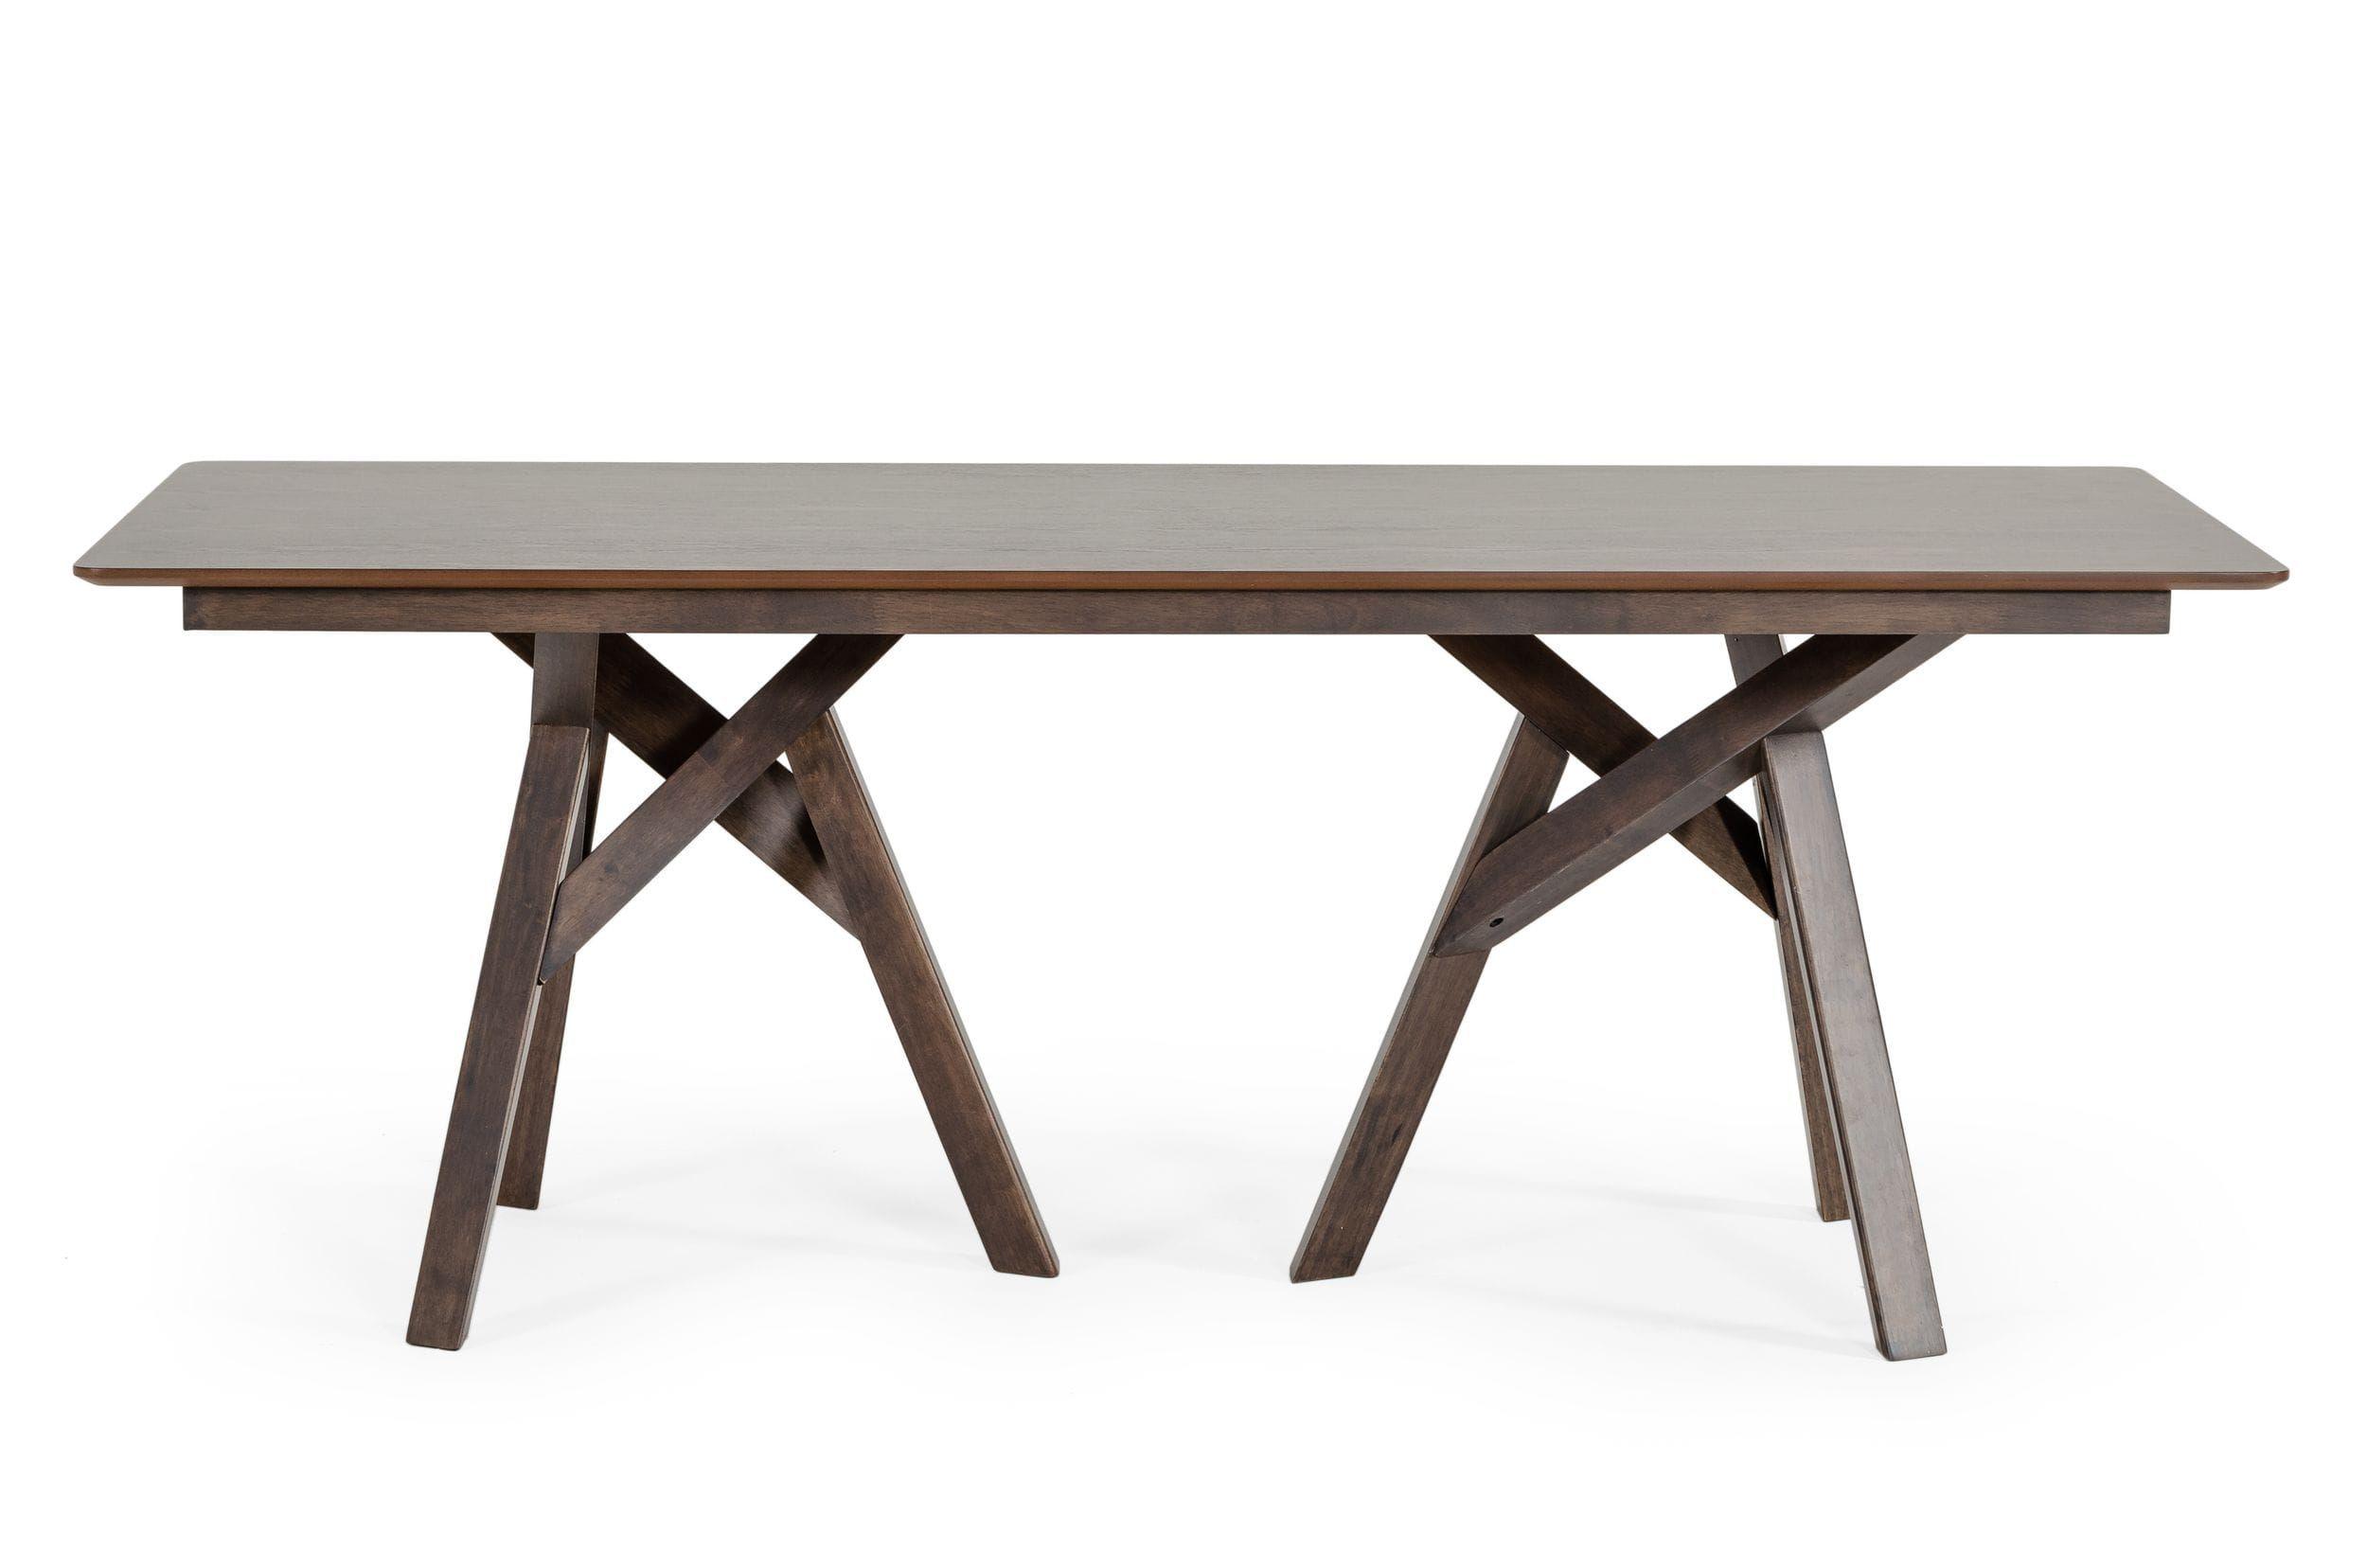 Contemporary, Modern Dining Table Grover VGMA-MIT-5222 in Dark Brown, Gray 